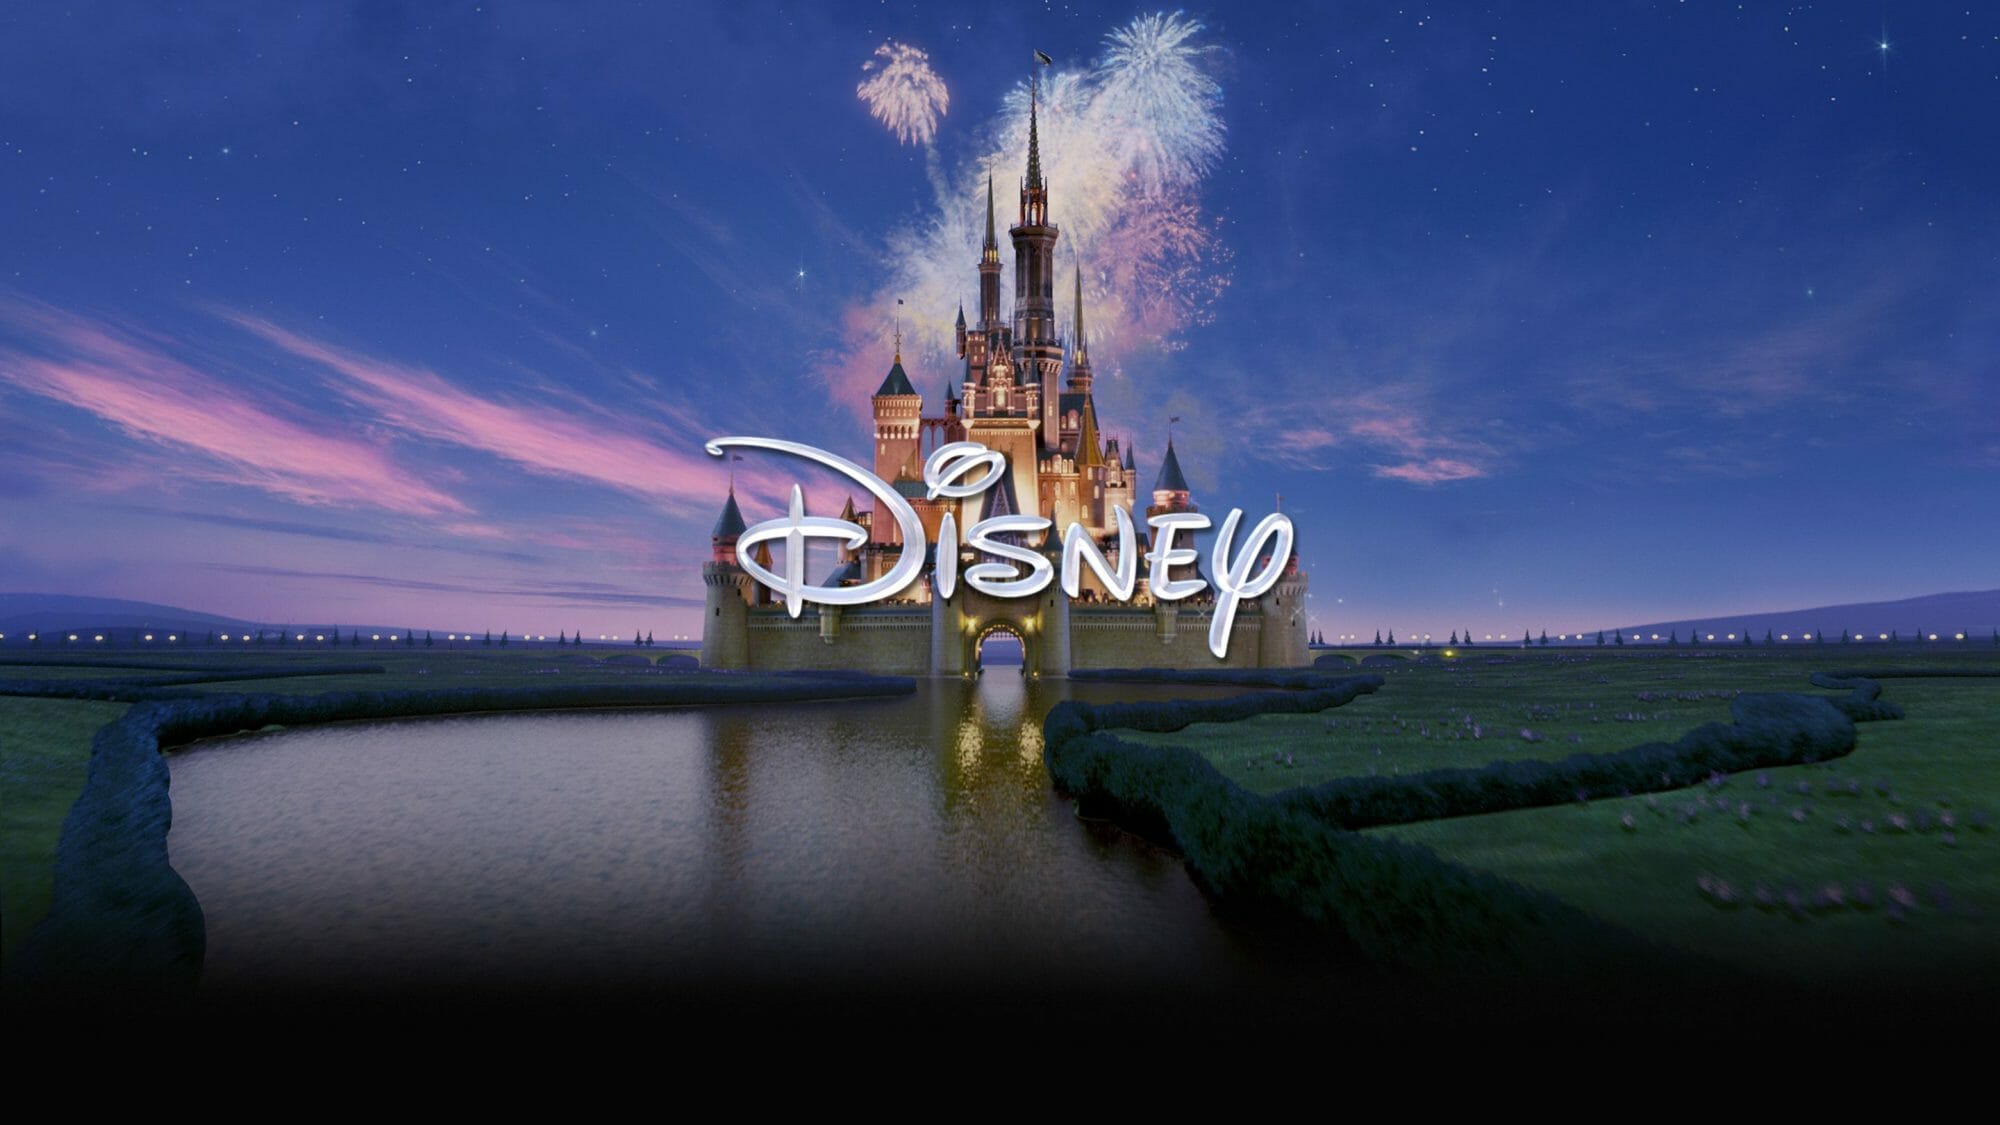 Disney To Lay Off 7,000 Workers In Major Revamp By CEO Iger | BusinessToday